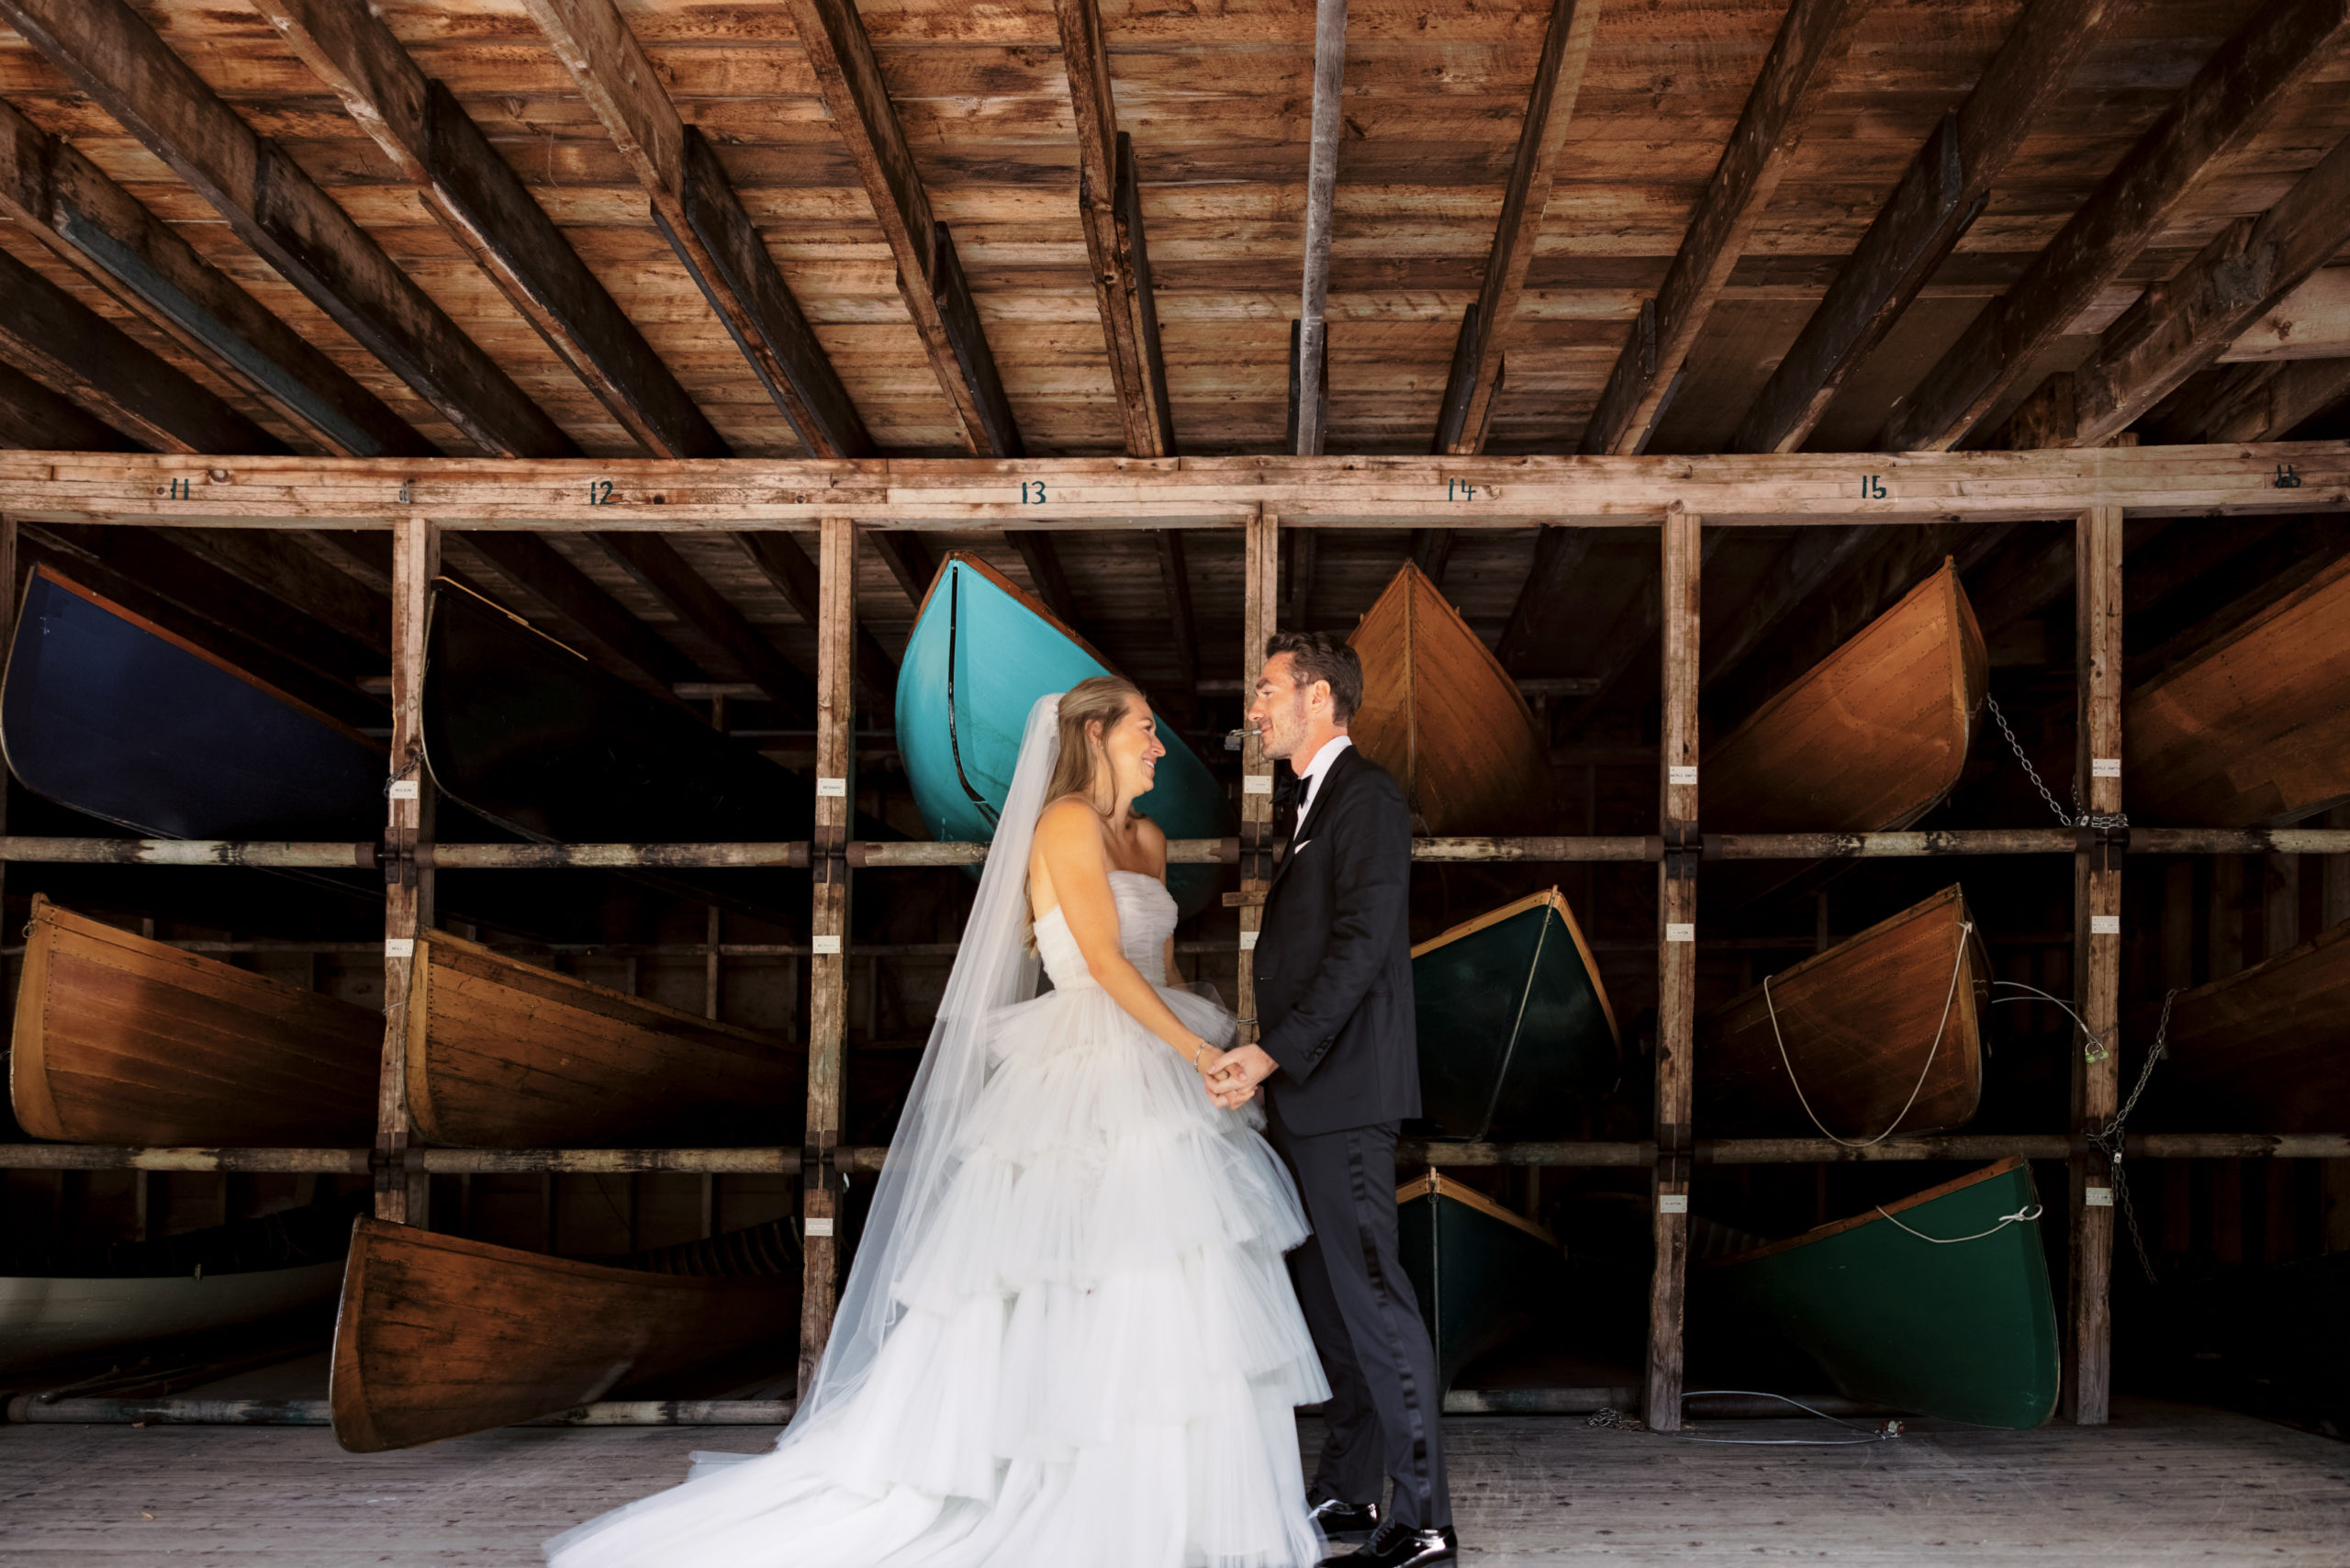 The bride and groom are happily staring at each other inside the boat house at The Ausable Club. Upstate NY wedding venues image by Jenny Fu Studio